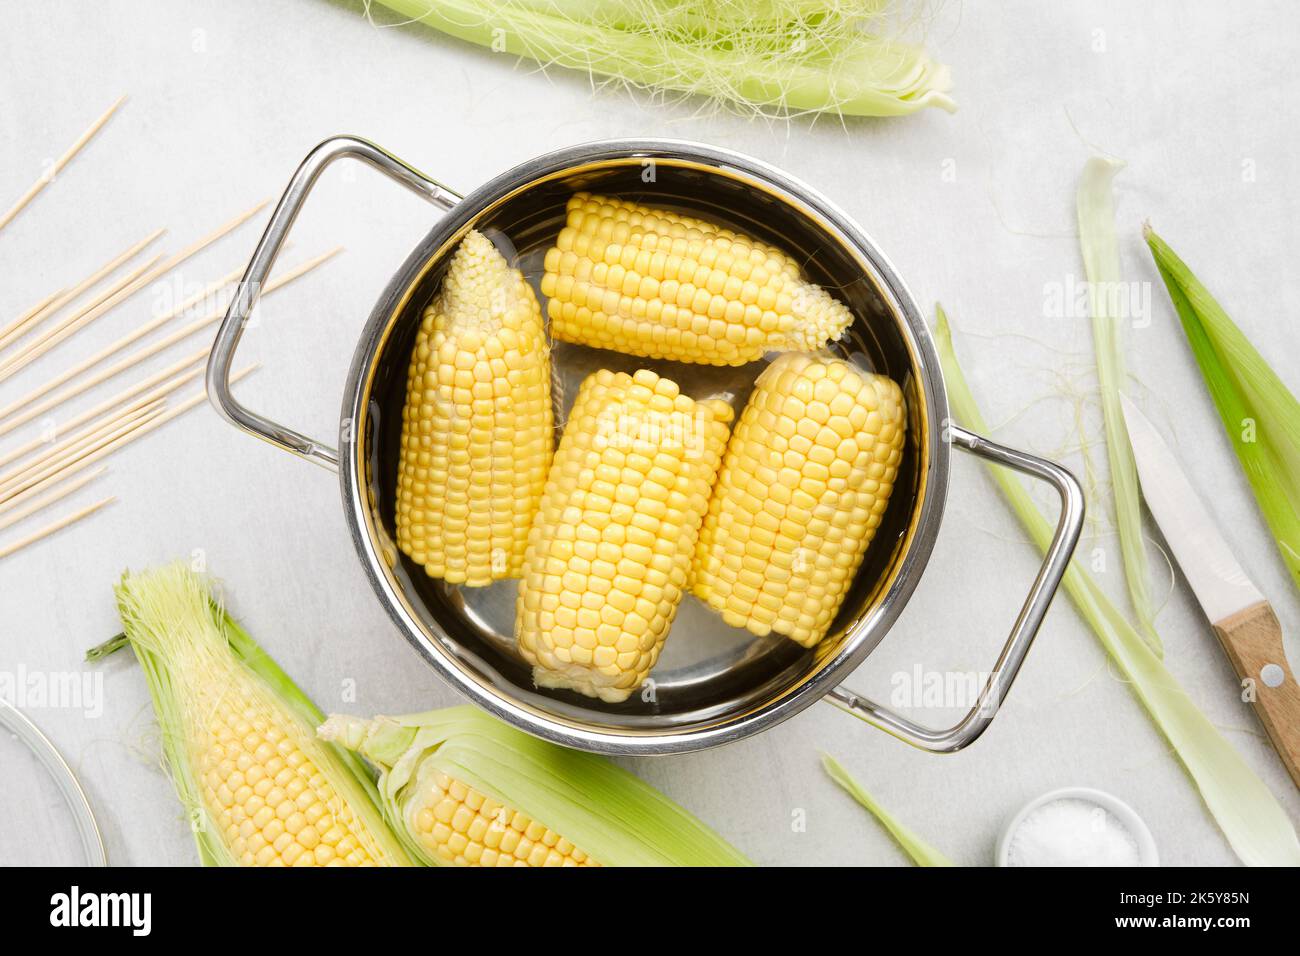 Cooking pot of yellow sweet corn cobs prepared for cooking, raw corncobs, wooden skewers, knife and salt on kitchen table, top view. Stock Photo